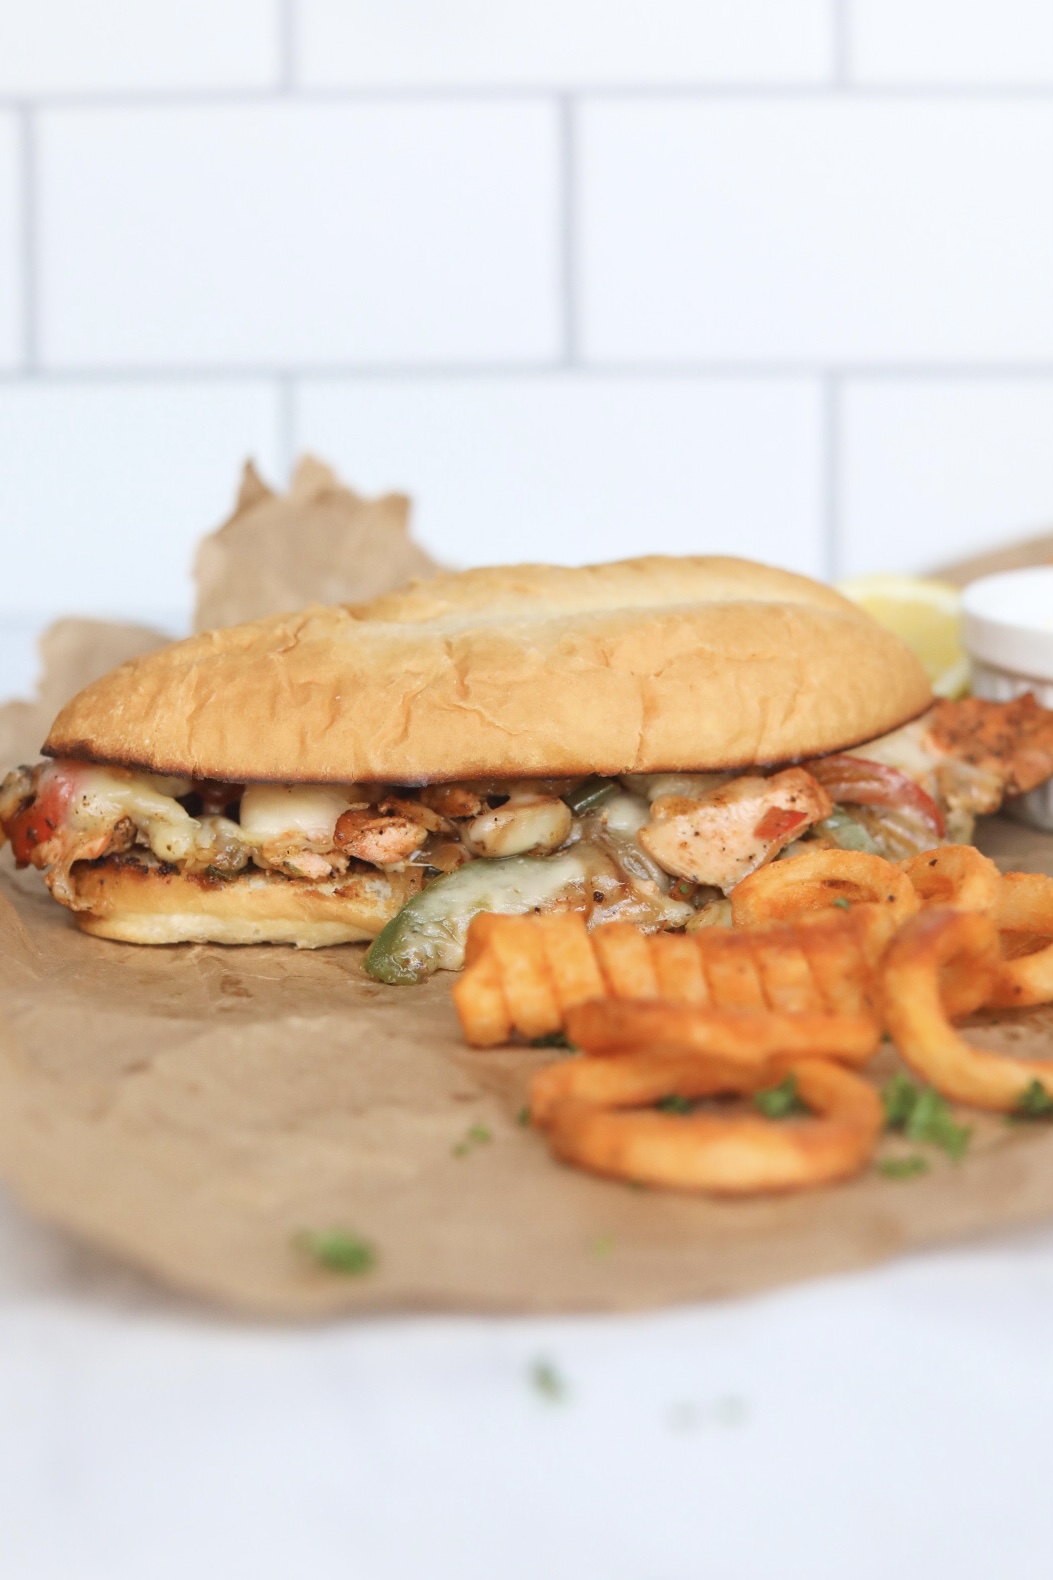 Salmon Cheesesteak with curly fries for styling purposes. 